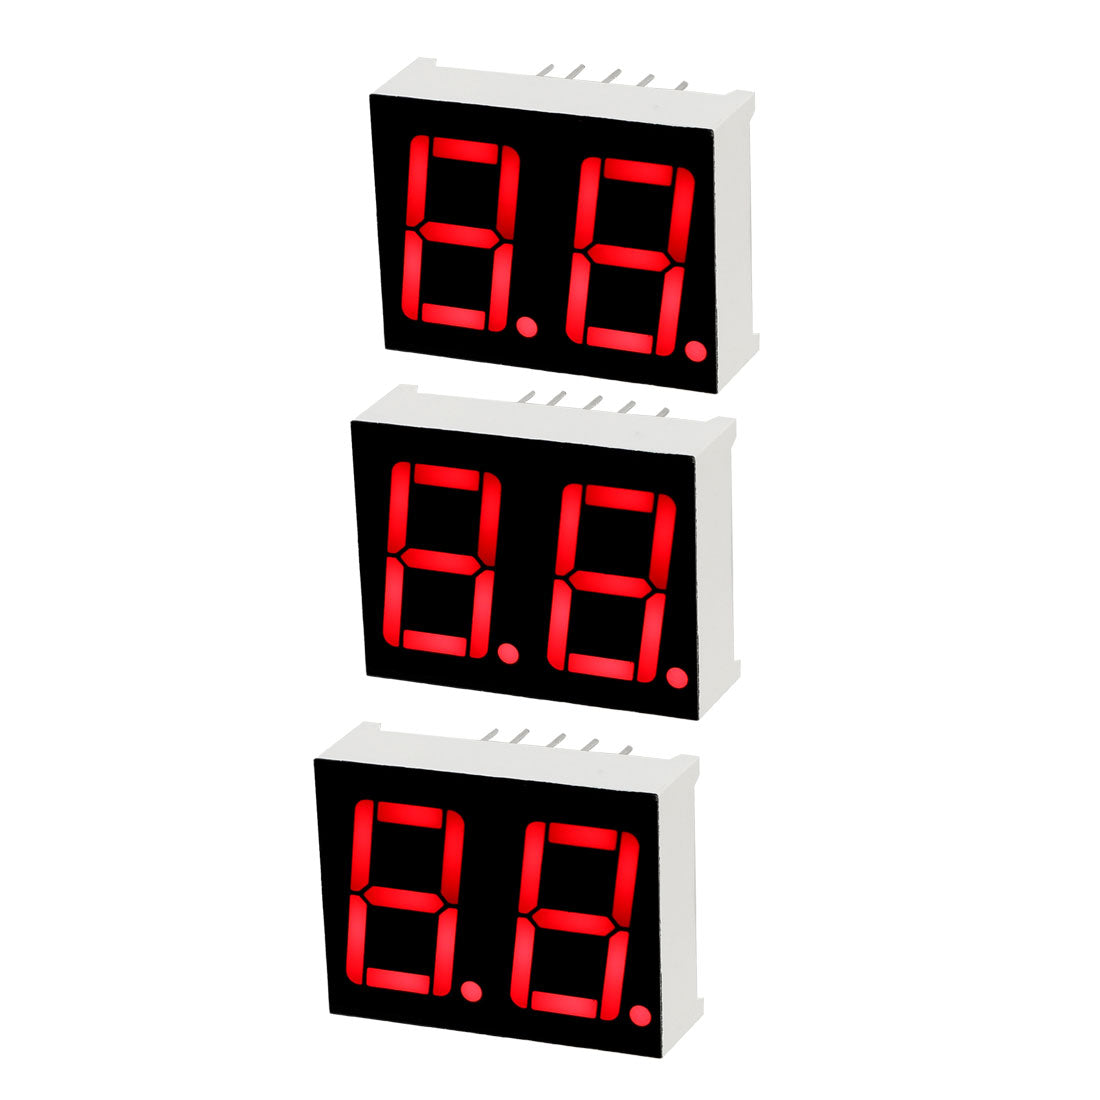 uxcell Uxcell Common Cathode 10 Pin 2 Bit 7 Segment 0.98 x 0.75 x 0.31 Inch 0.55" Red LED Display Digital Tube 3pcs